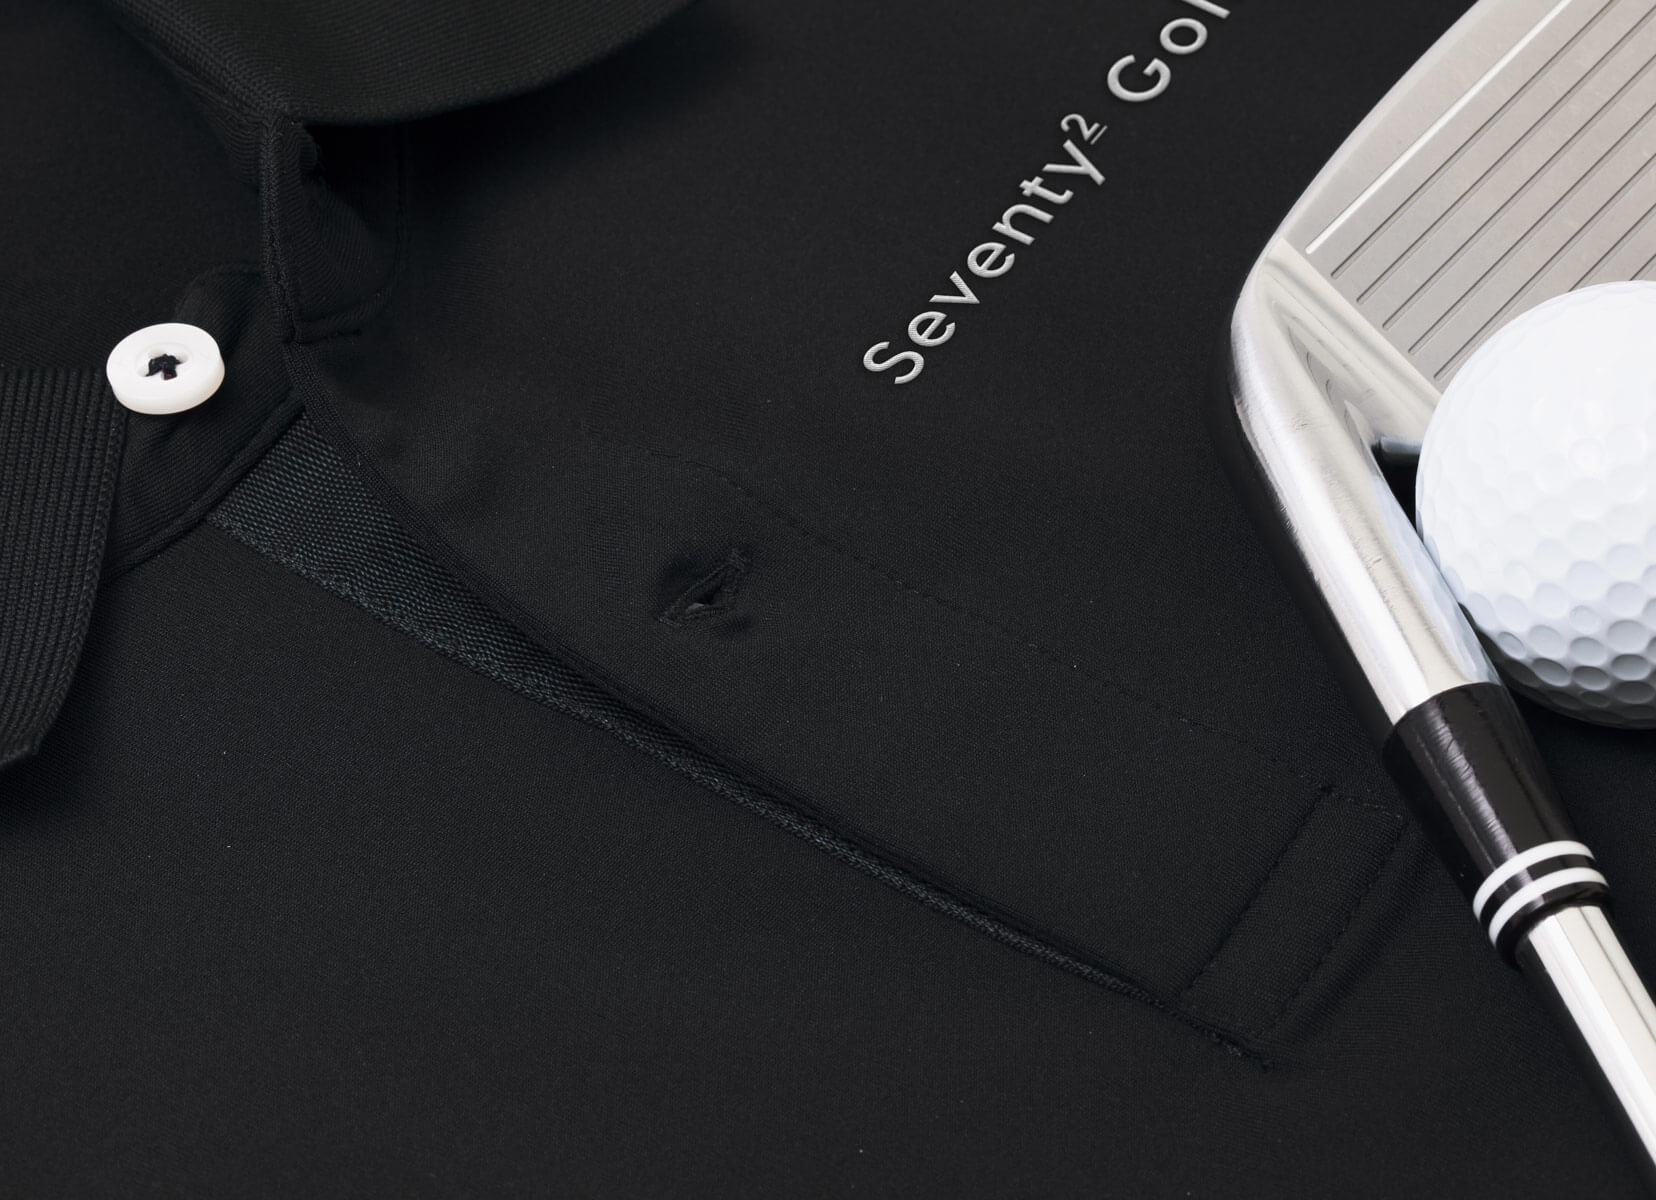 Black polo shirt with white embroidered logo next to a golf club and ball